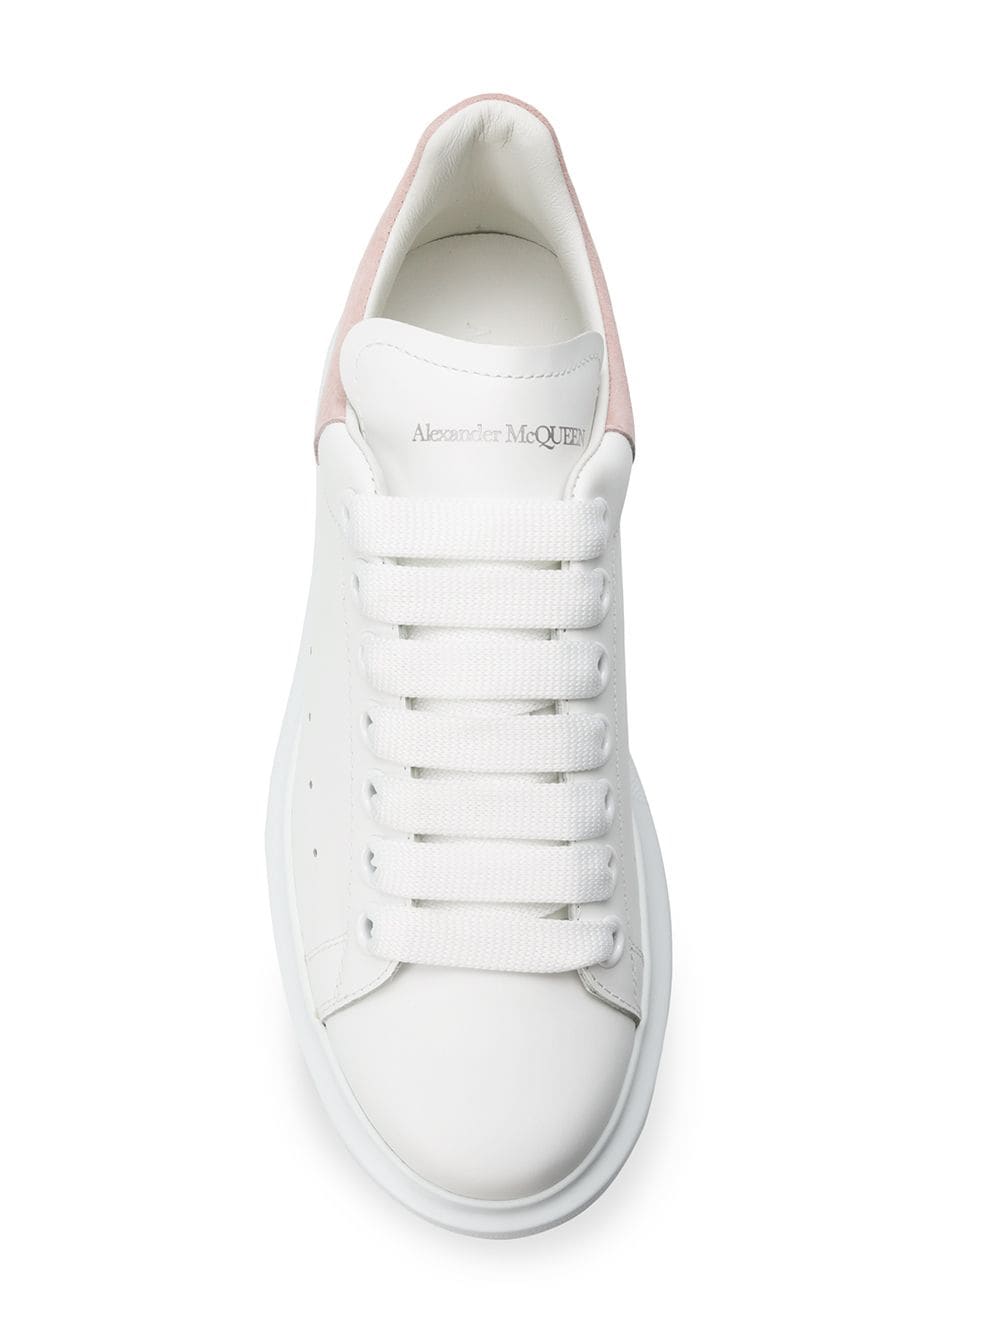 White/pink leather/suede oversized low-top sneakers